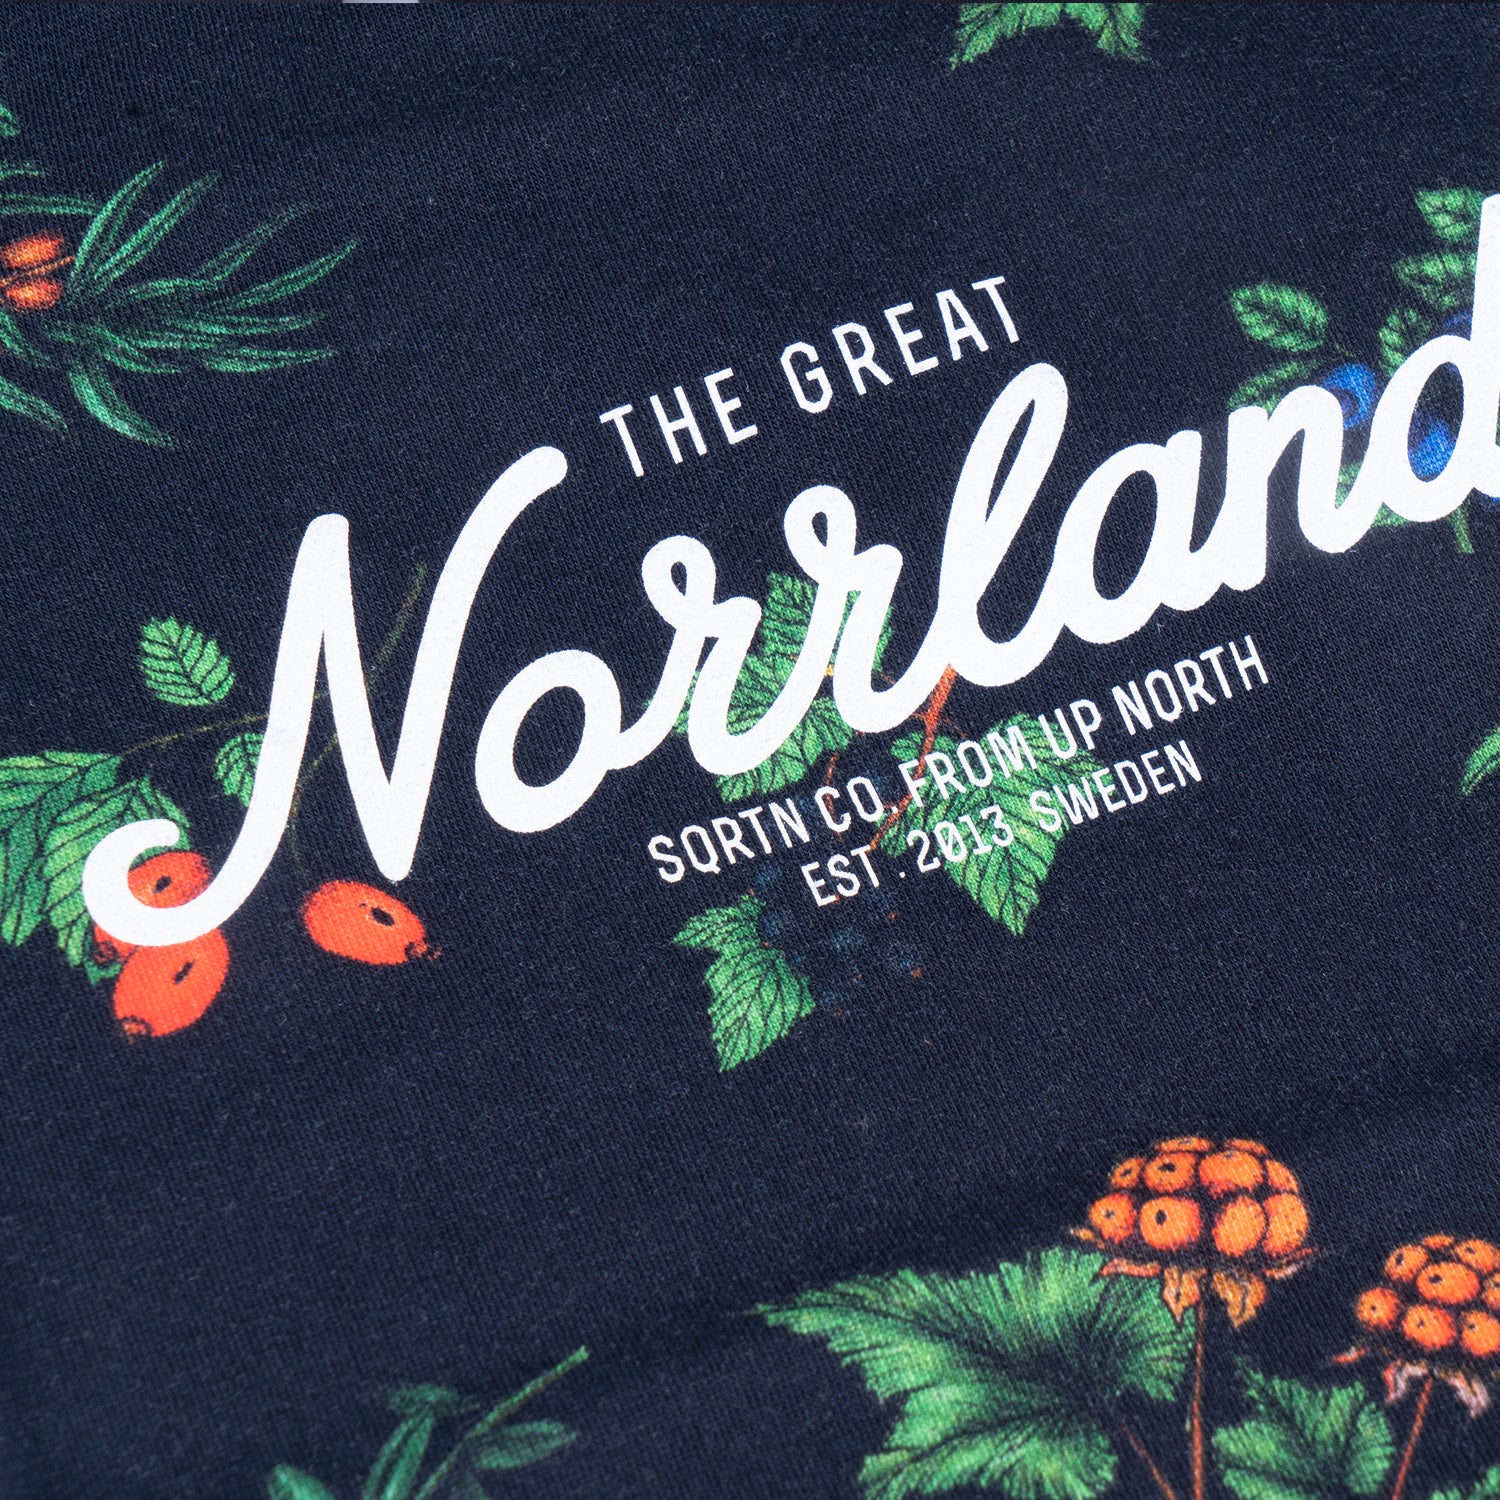 GREAT NORRLAND BODY - BERRY BLACK